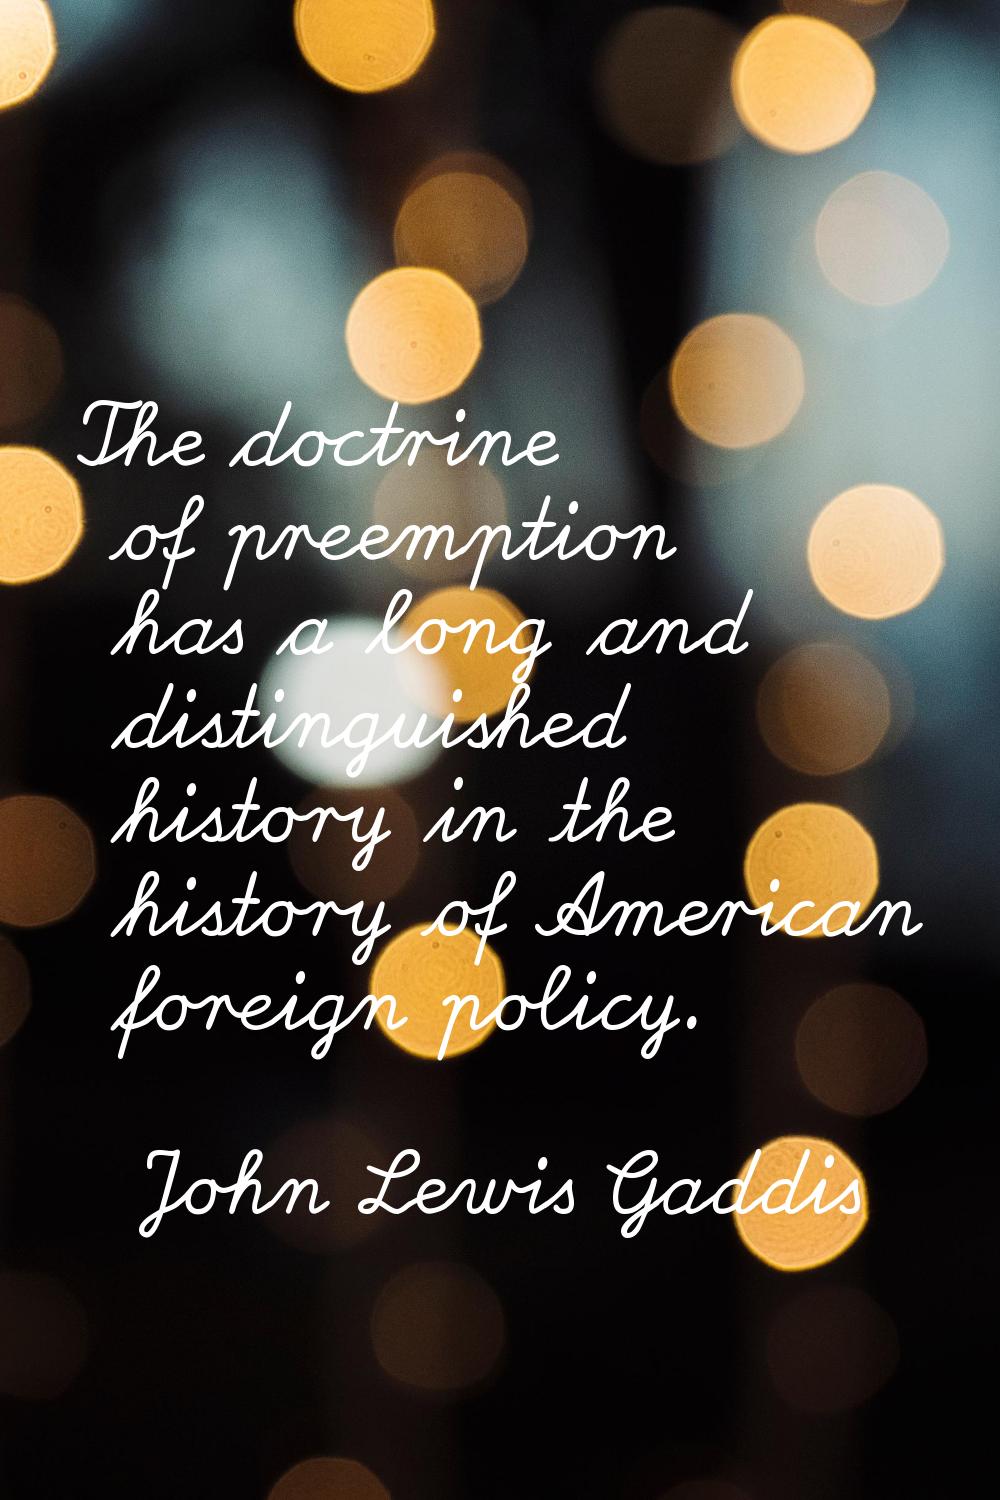 The doctrine of preemption has a long and distinguished history in the history of American foreign 